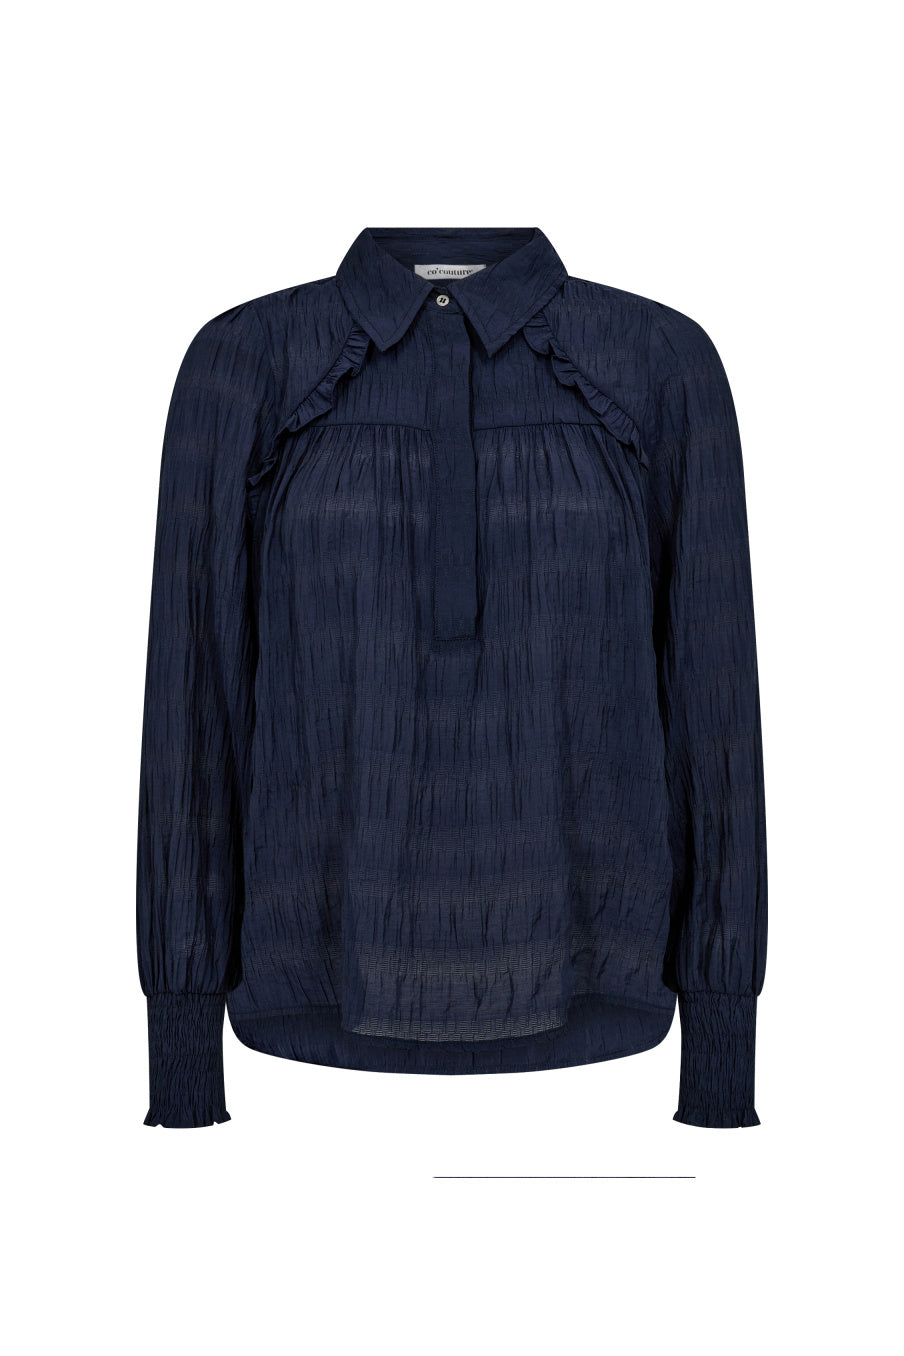 Co'Couture Structure Line Frill Blouse - Navy - RUM Amsterdam